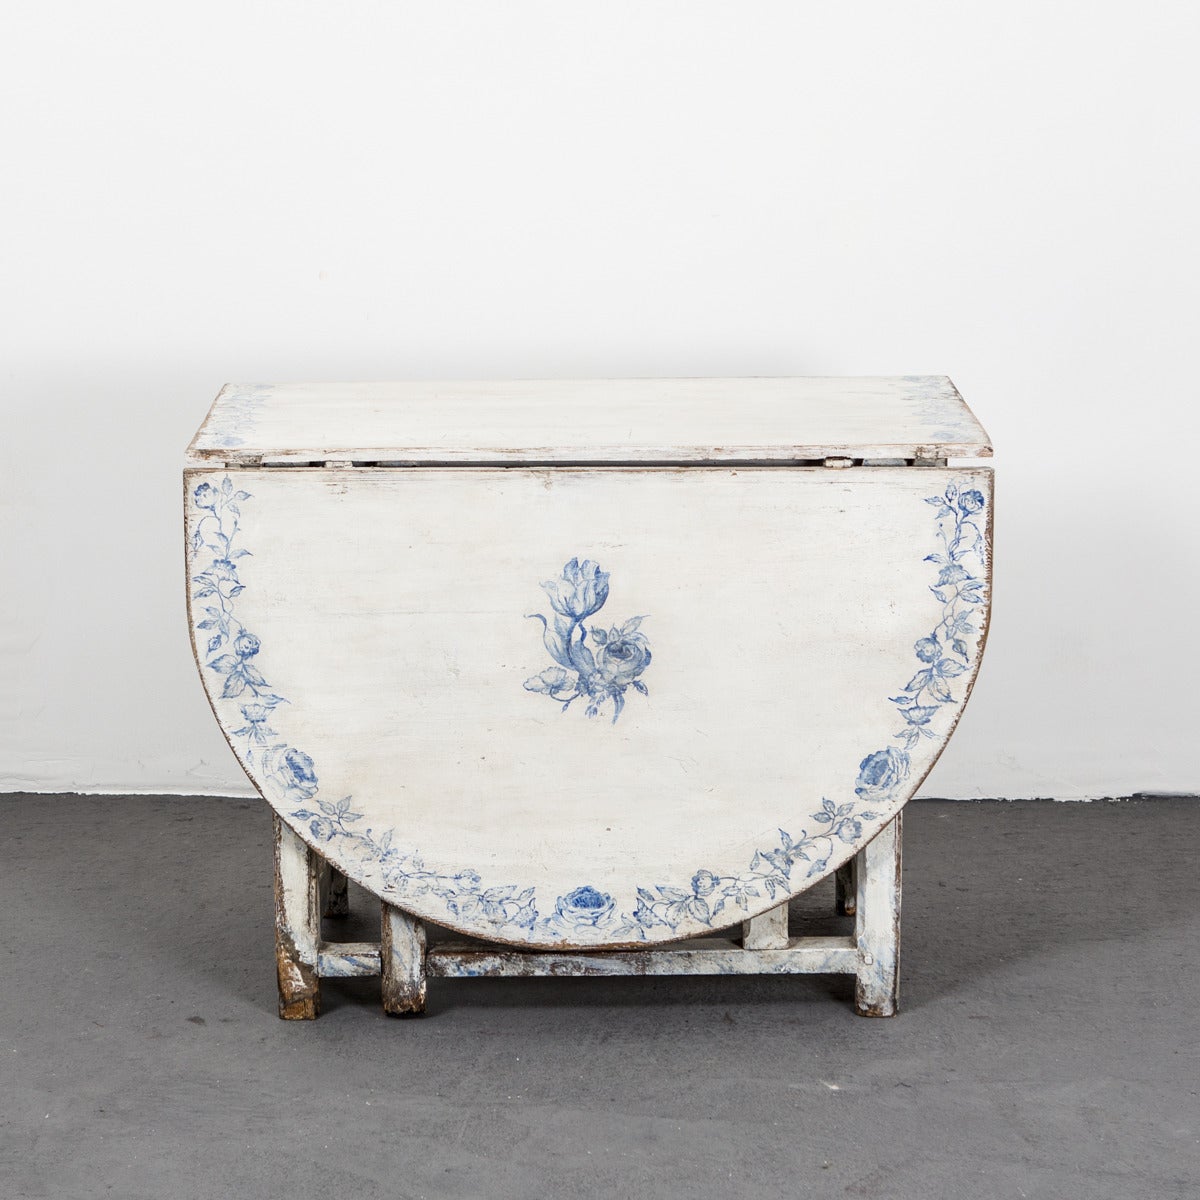 Early 18th Century Table Drop-Leaf Swedish 18th Century White and Blue Flowers Decor, Sweden